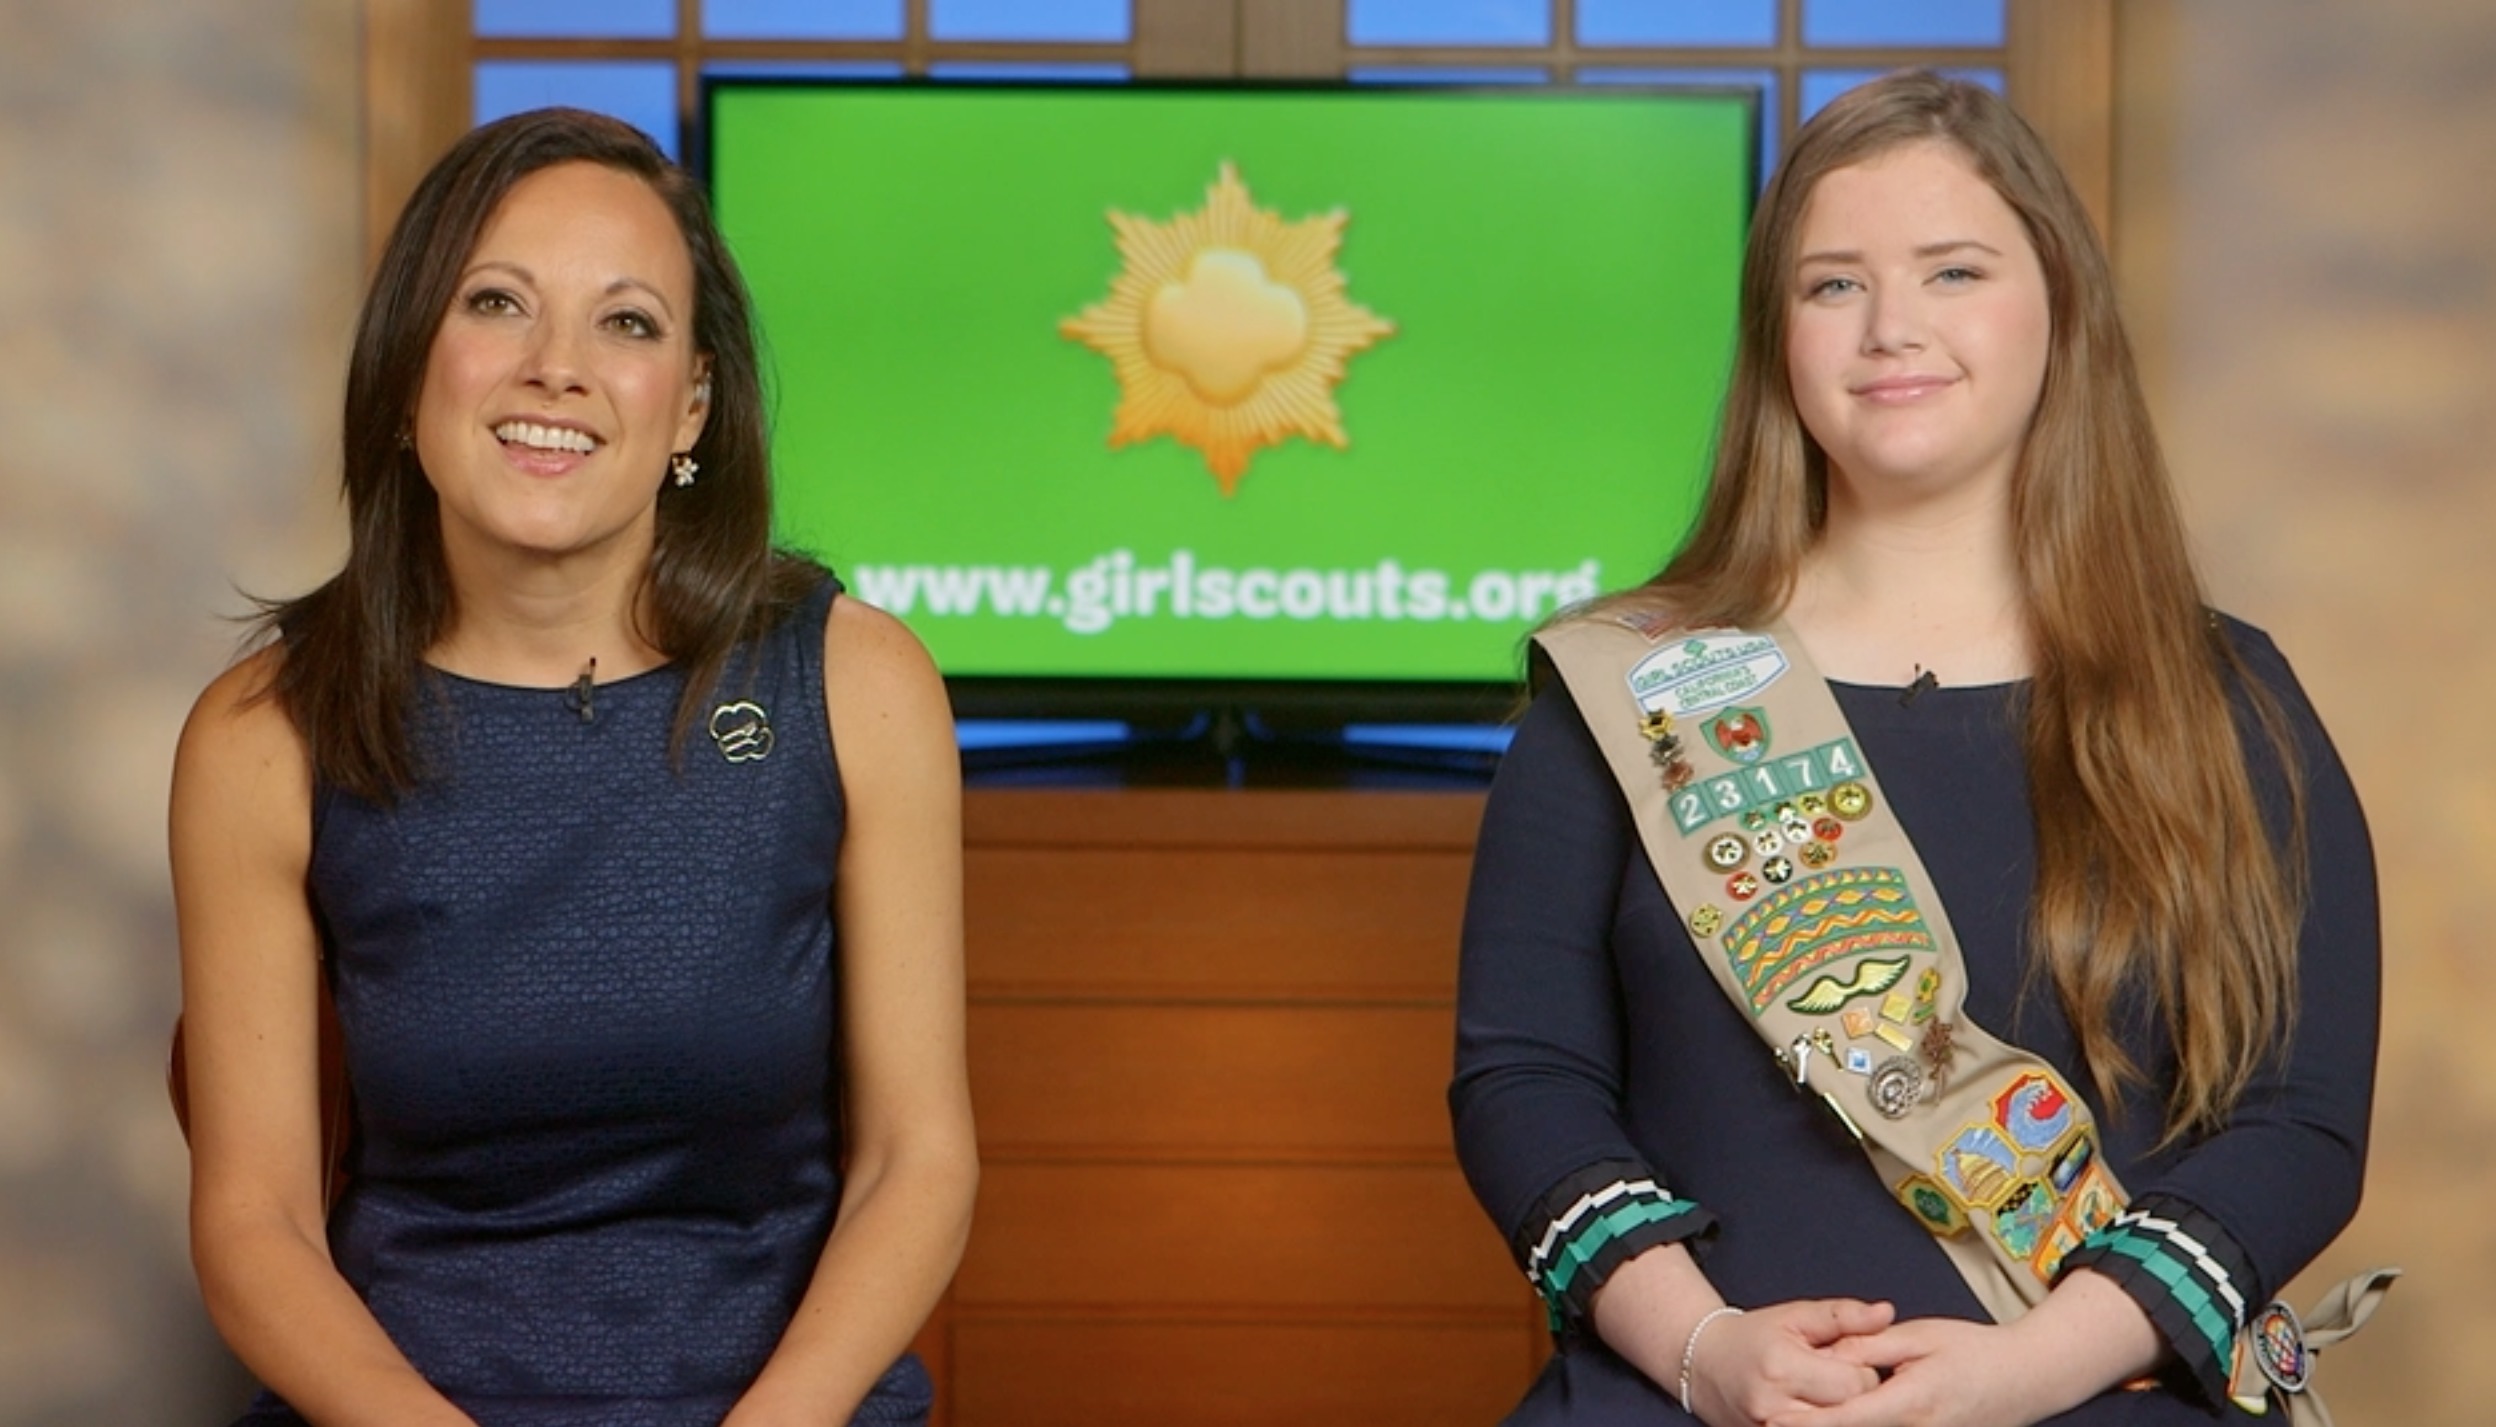 How A 17-Year-Old Girl Scout Reduced Plastic Straws